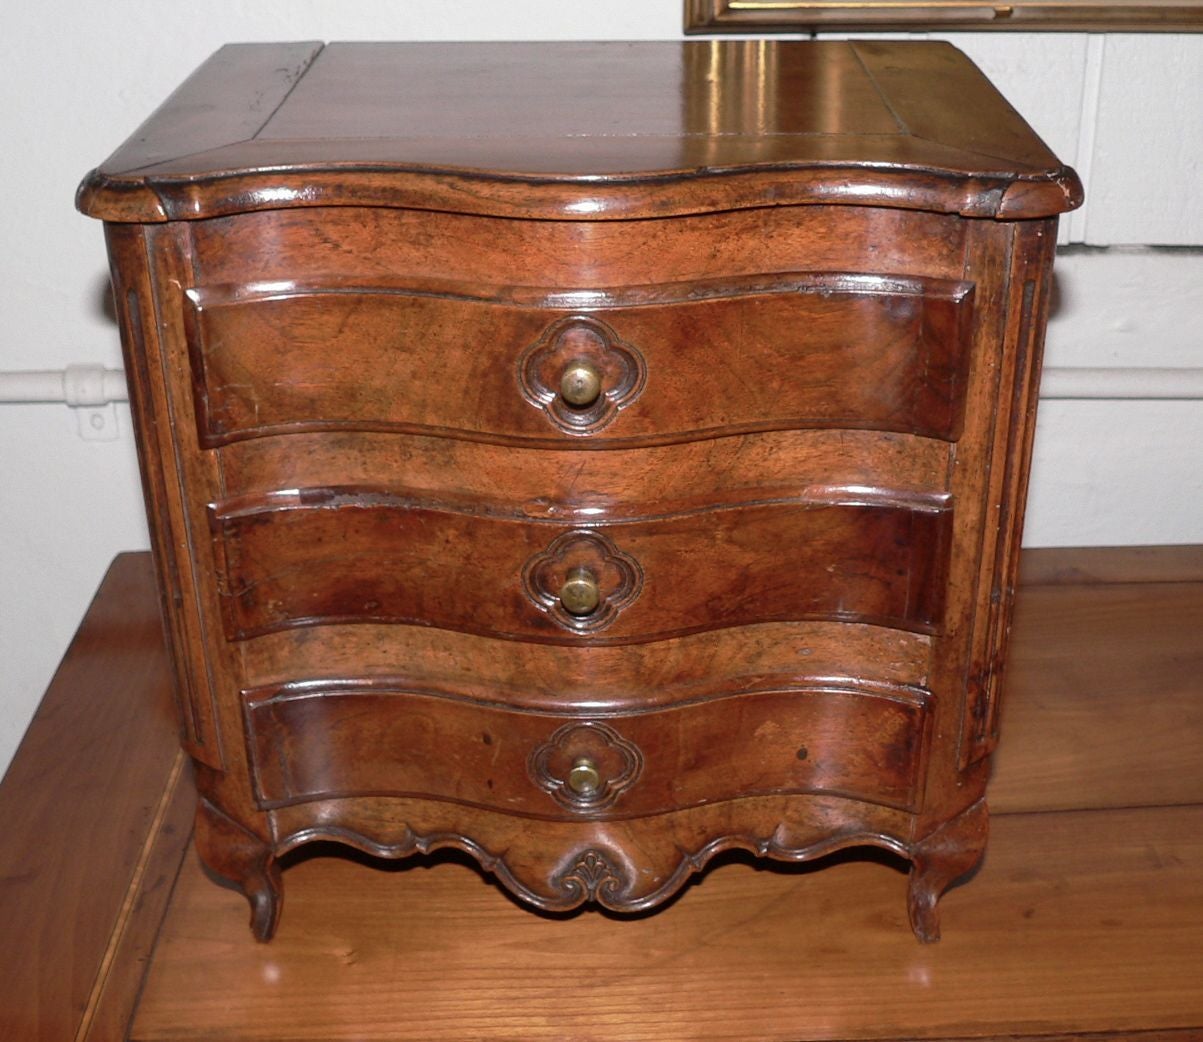 Beautifully crafted with great patina and color to the walnut. Fielded panelled sides and back with fluted columns. Dovetailed drawers lined probably with the orignial silk embroidered fabric. Original brass drawer knobs.   Galbee styling indicates